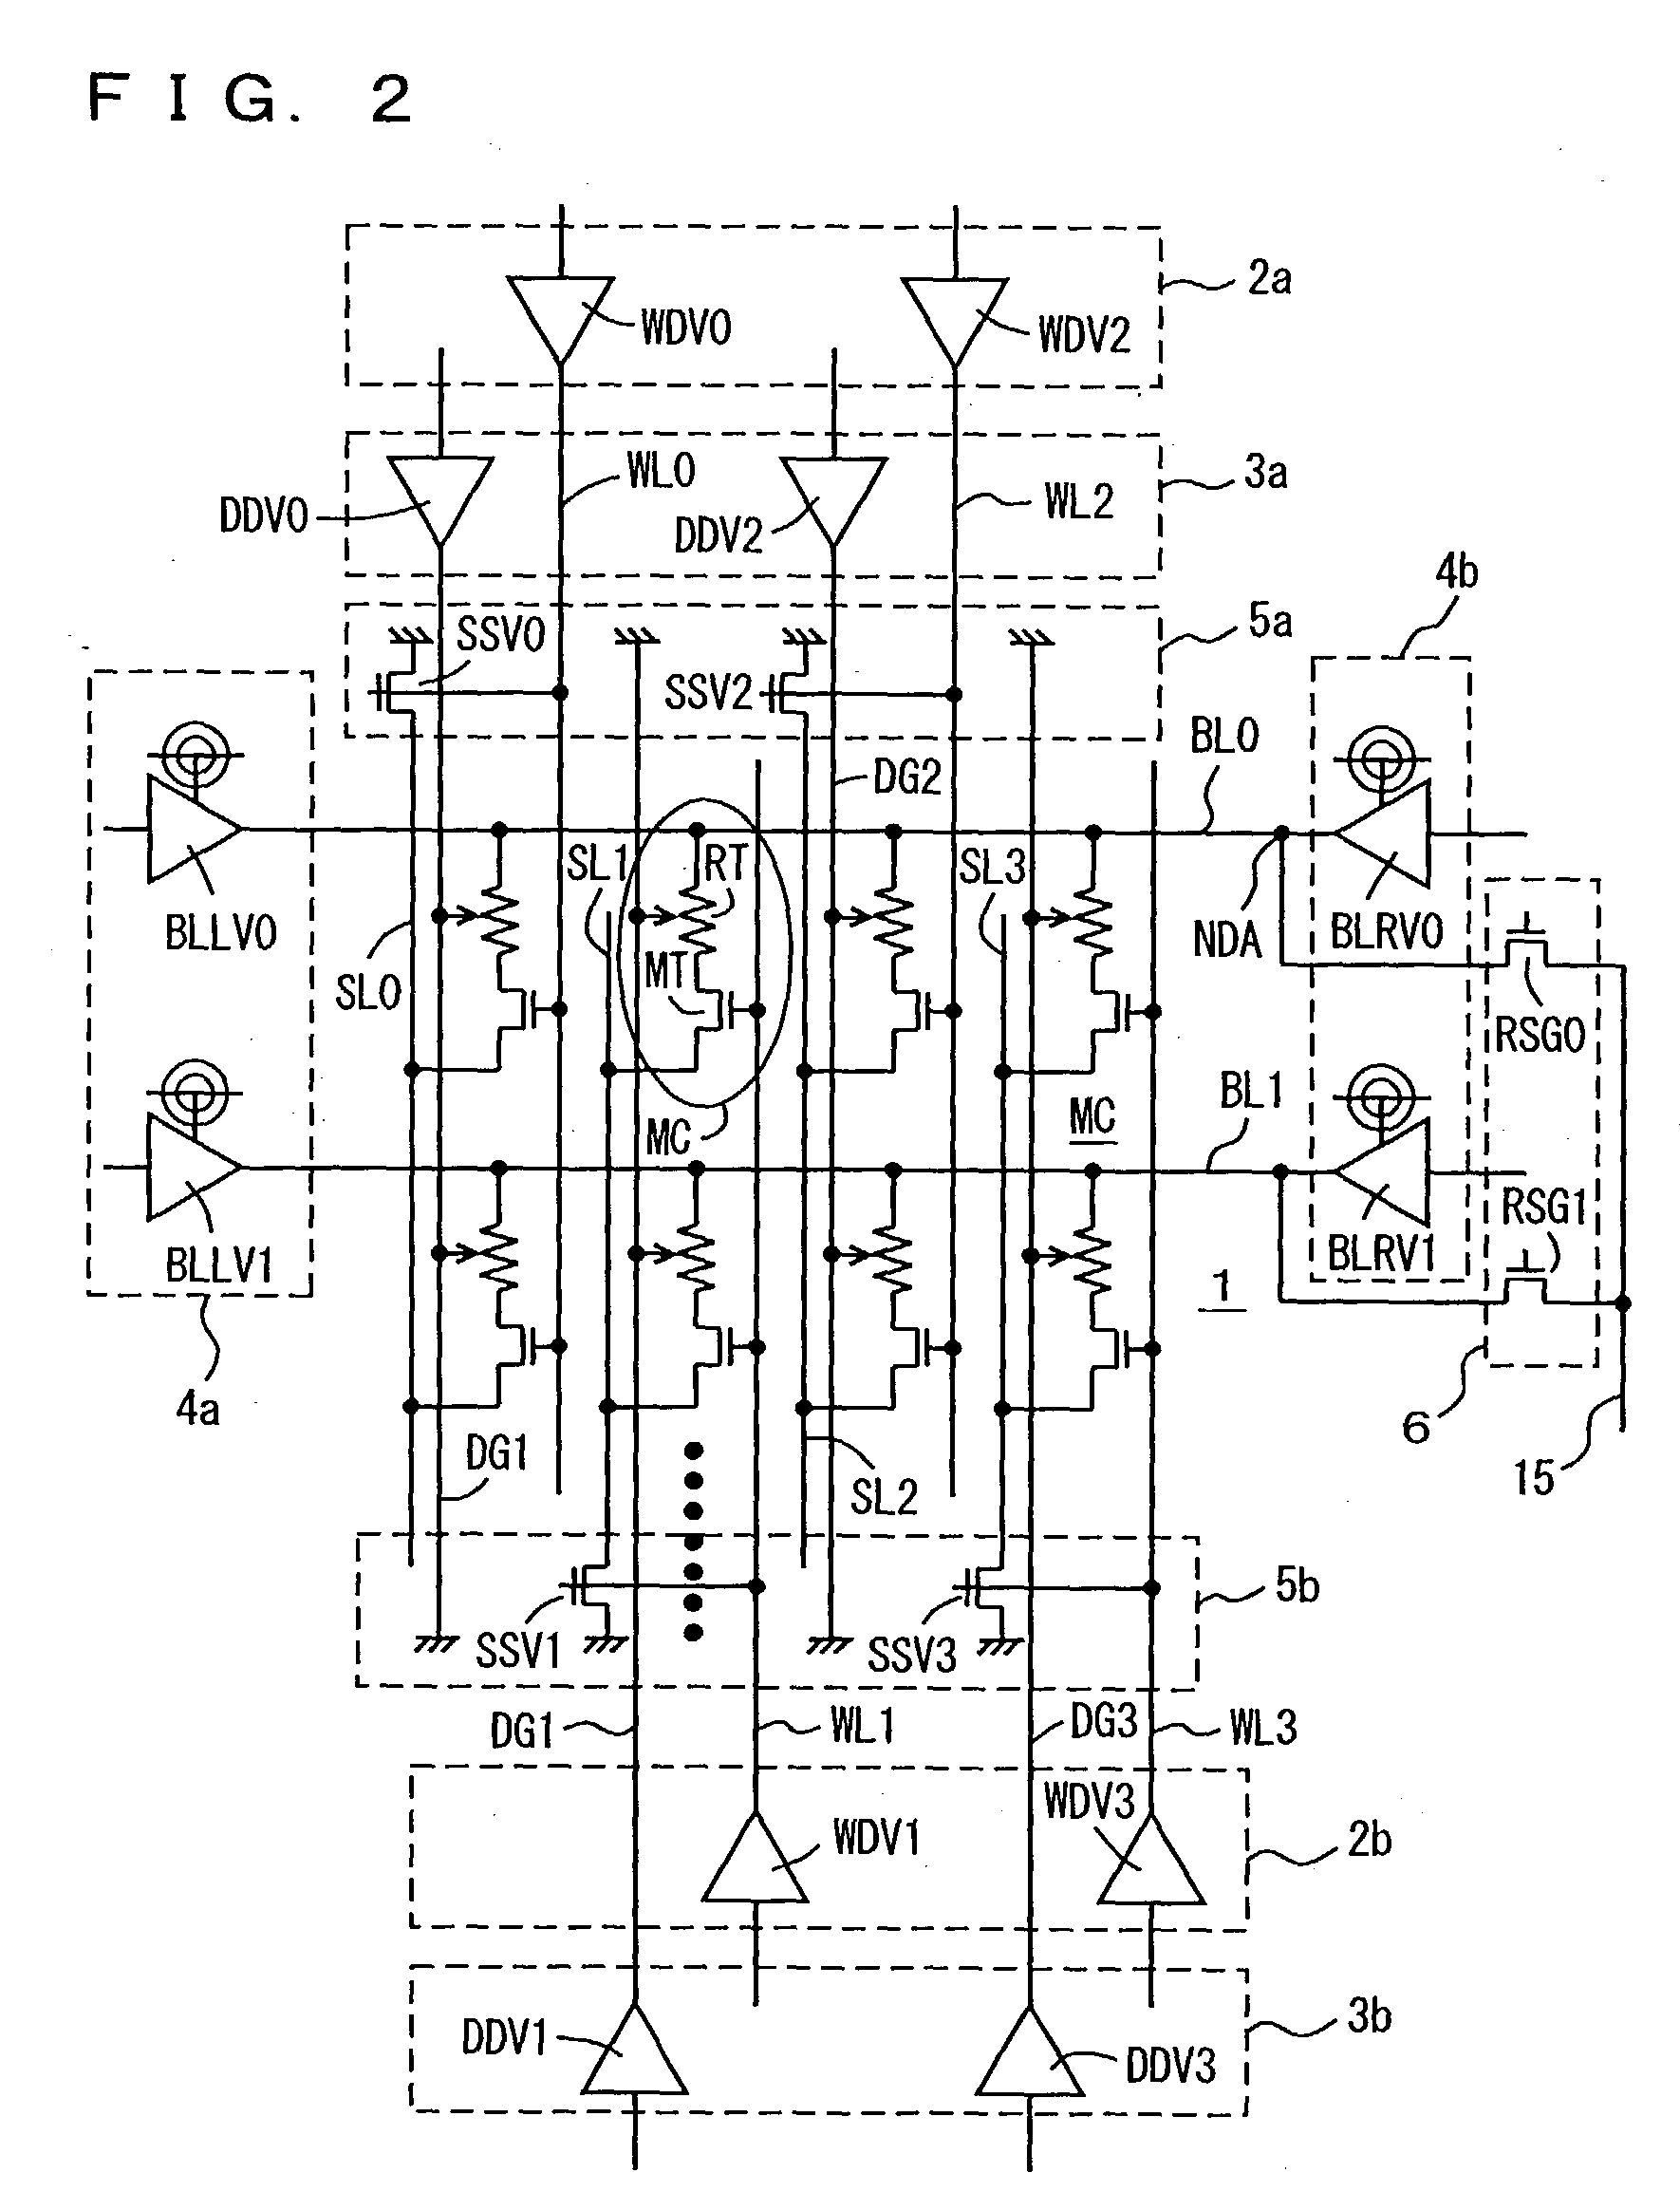 Semiconductor memory device operating with low current consumption